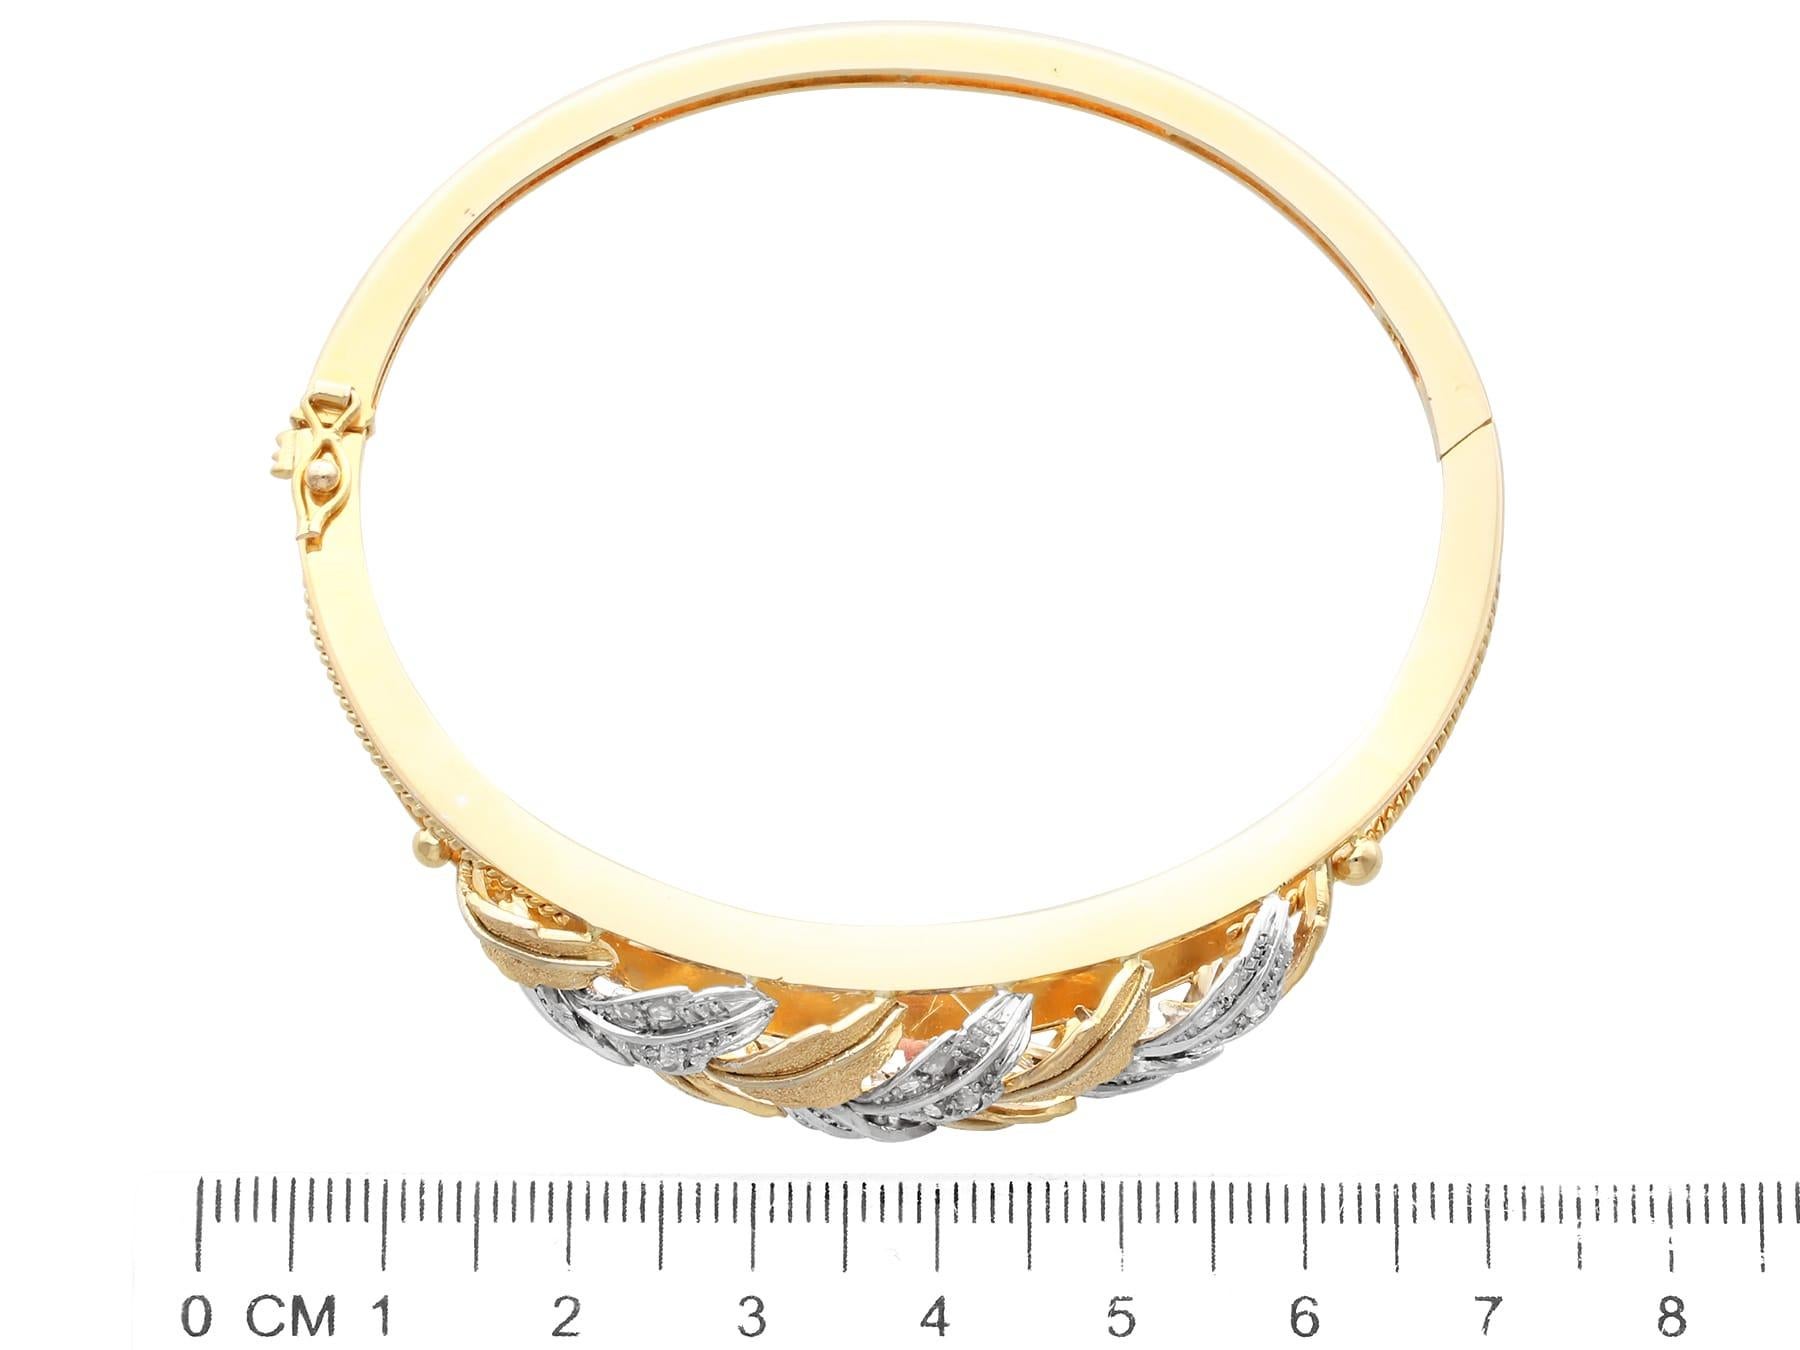 Women's Contemporary Diamond Yellow Gold and White Gold Set Bangle For Sale